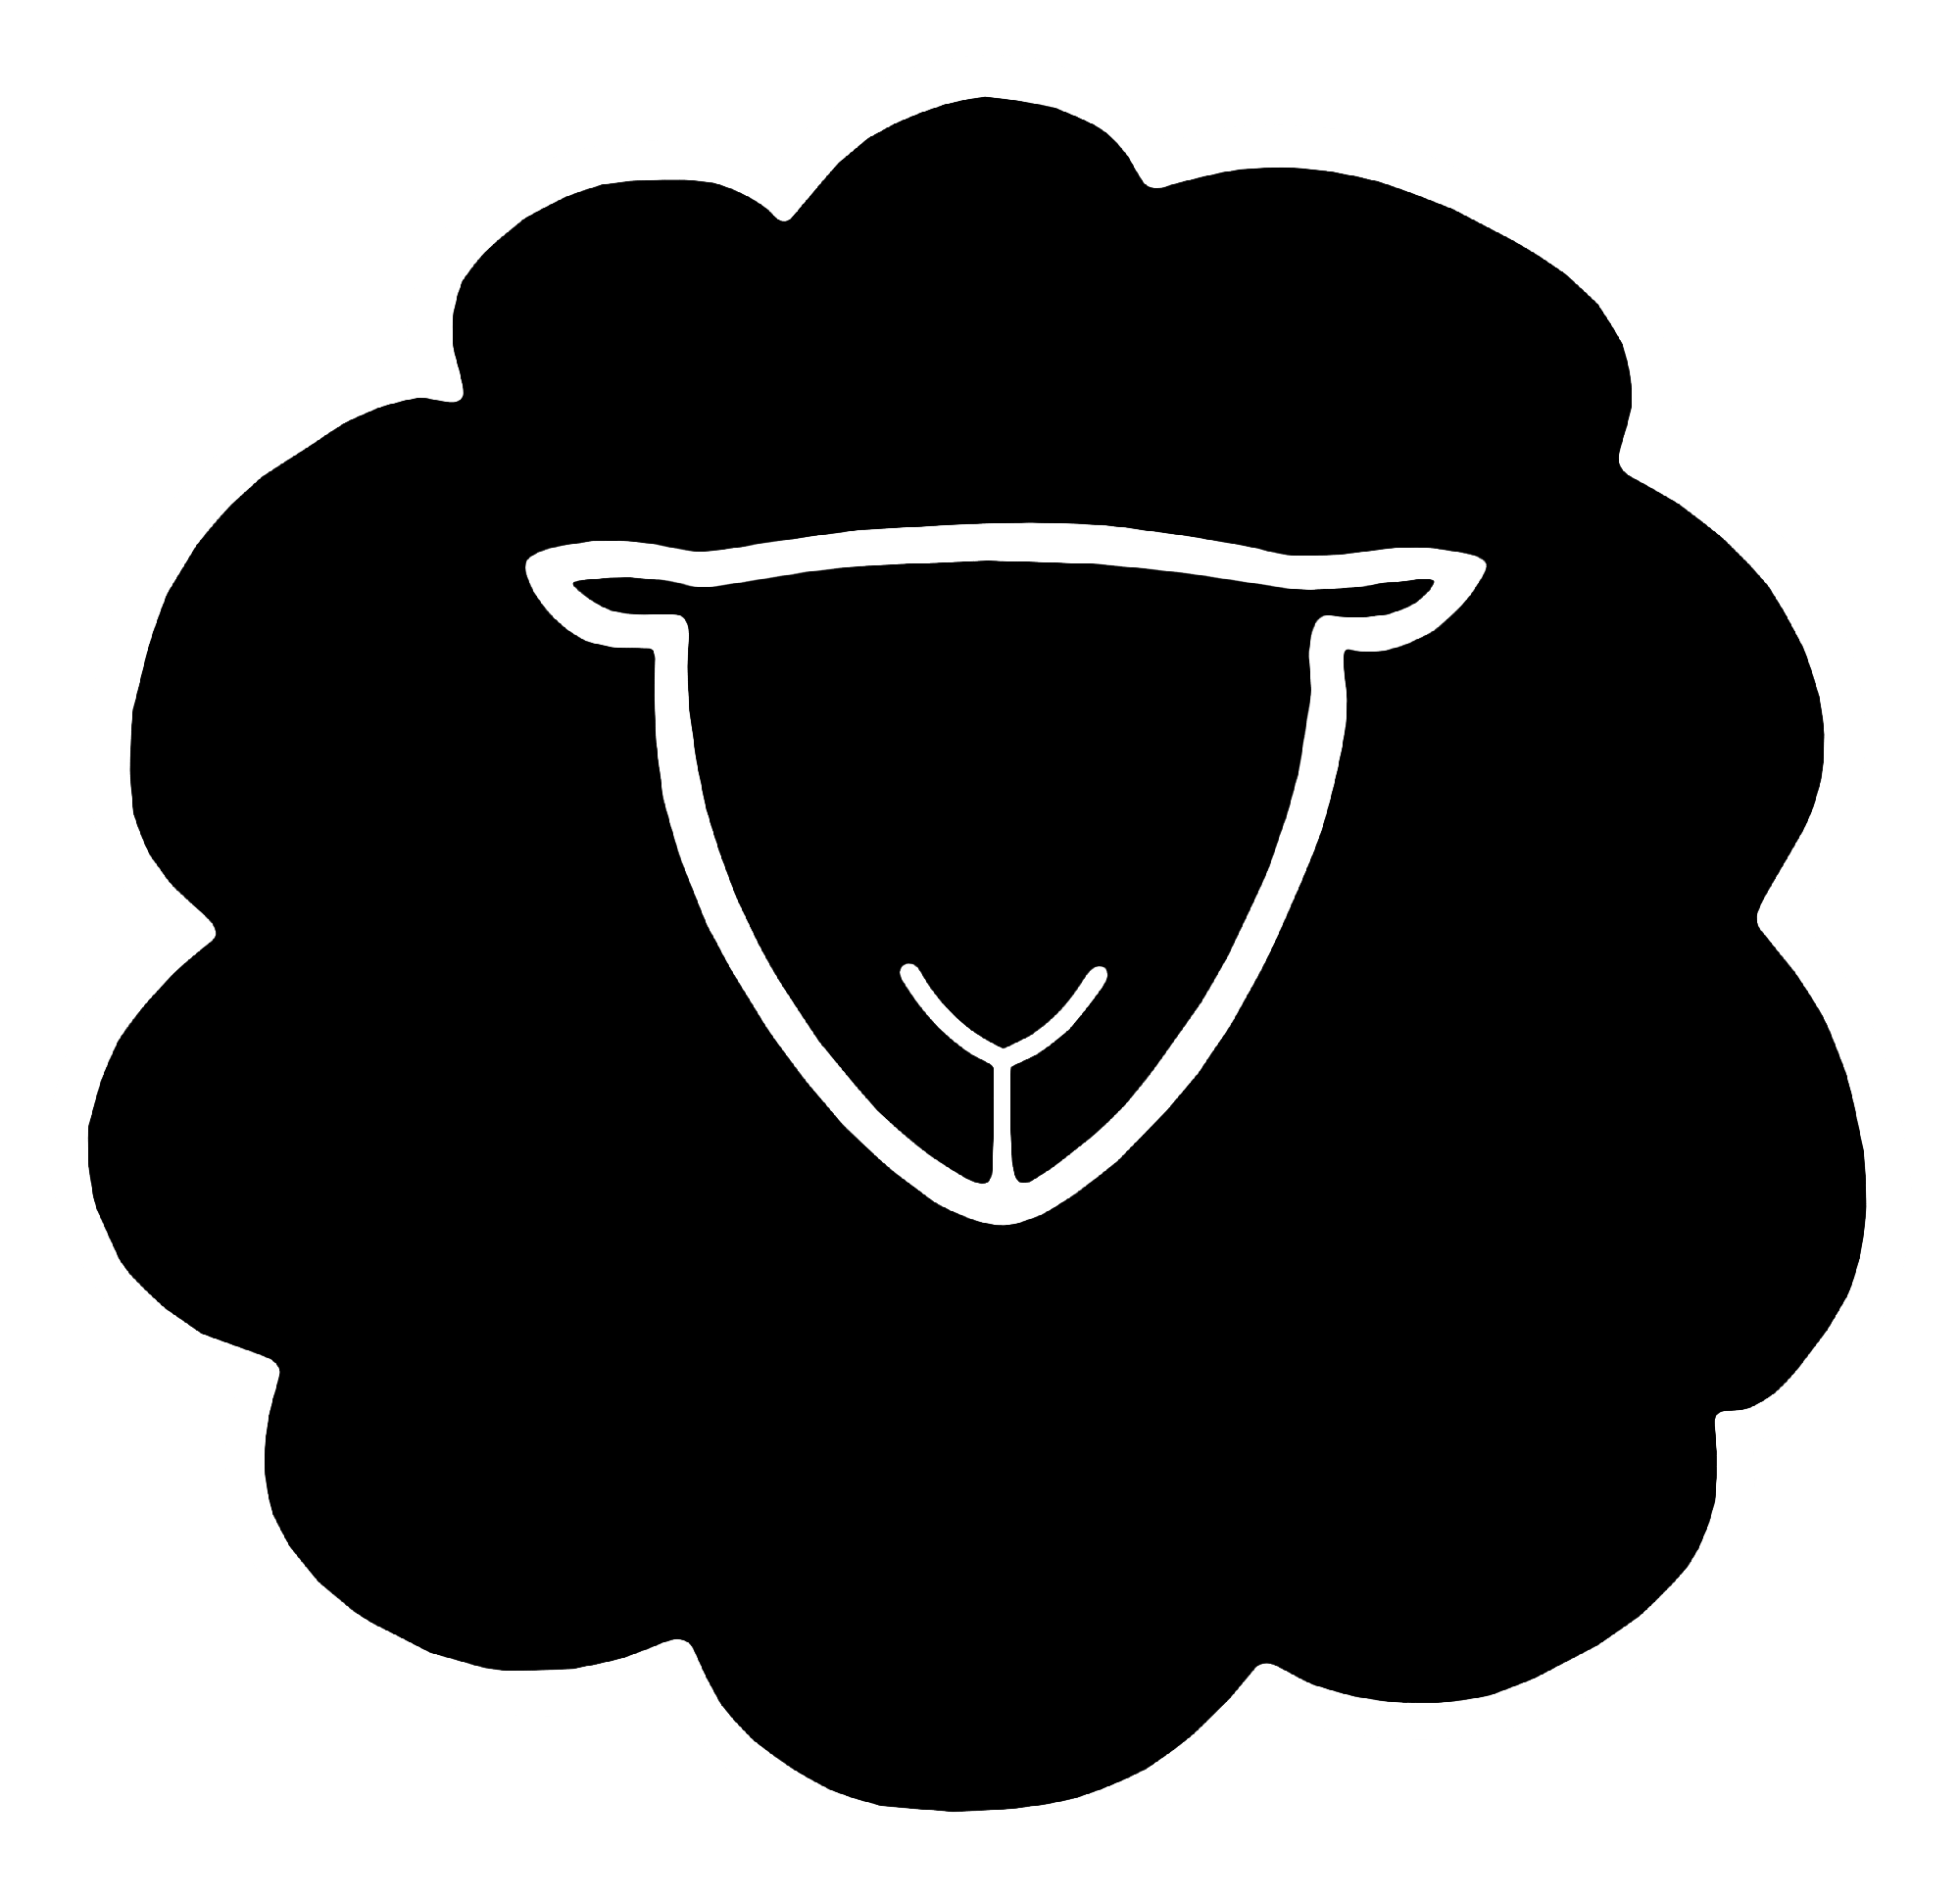 image of a black sheep with a black head